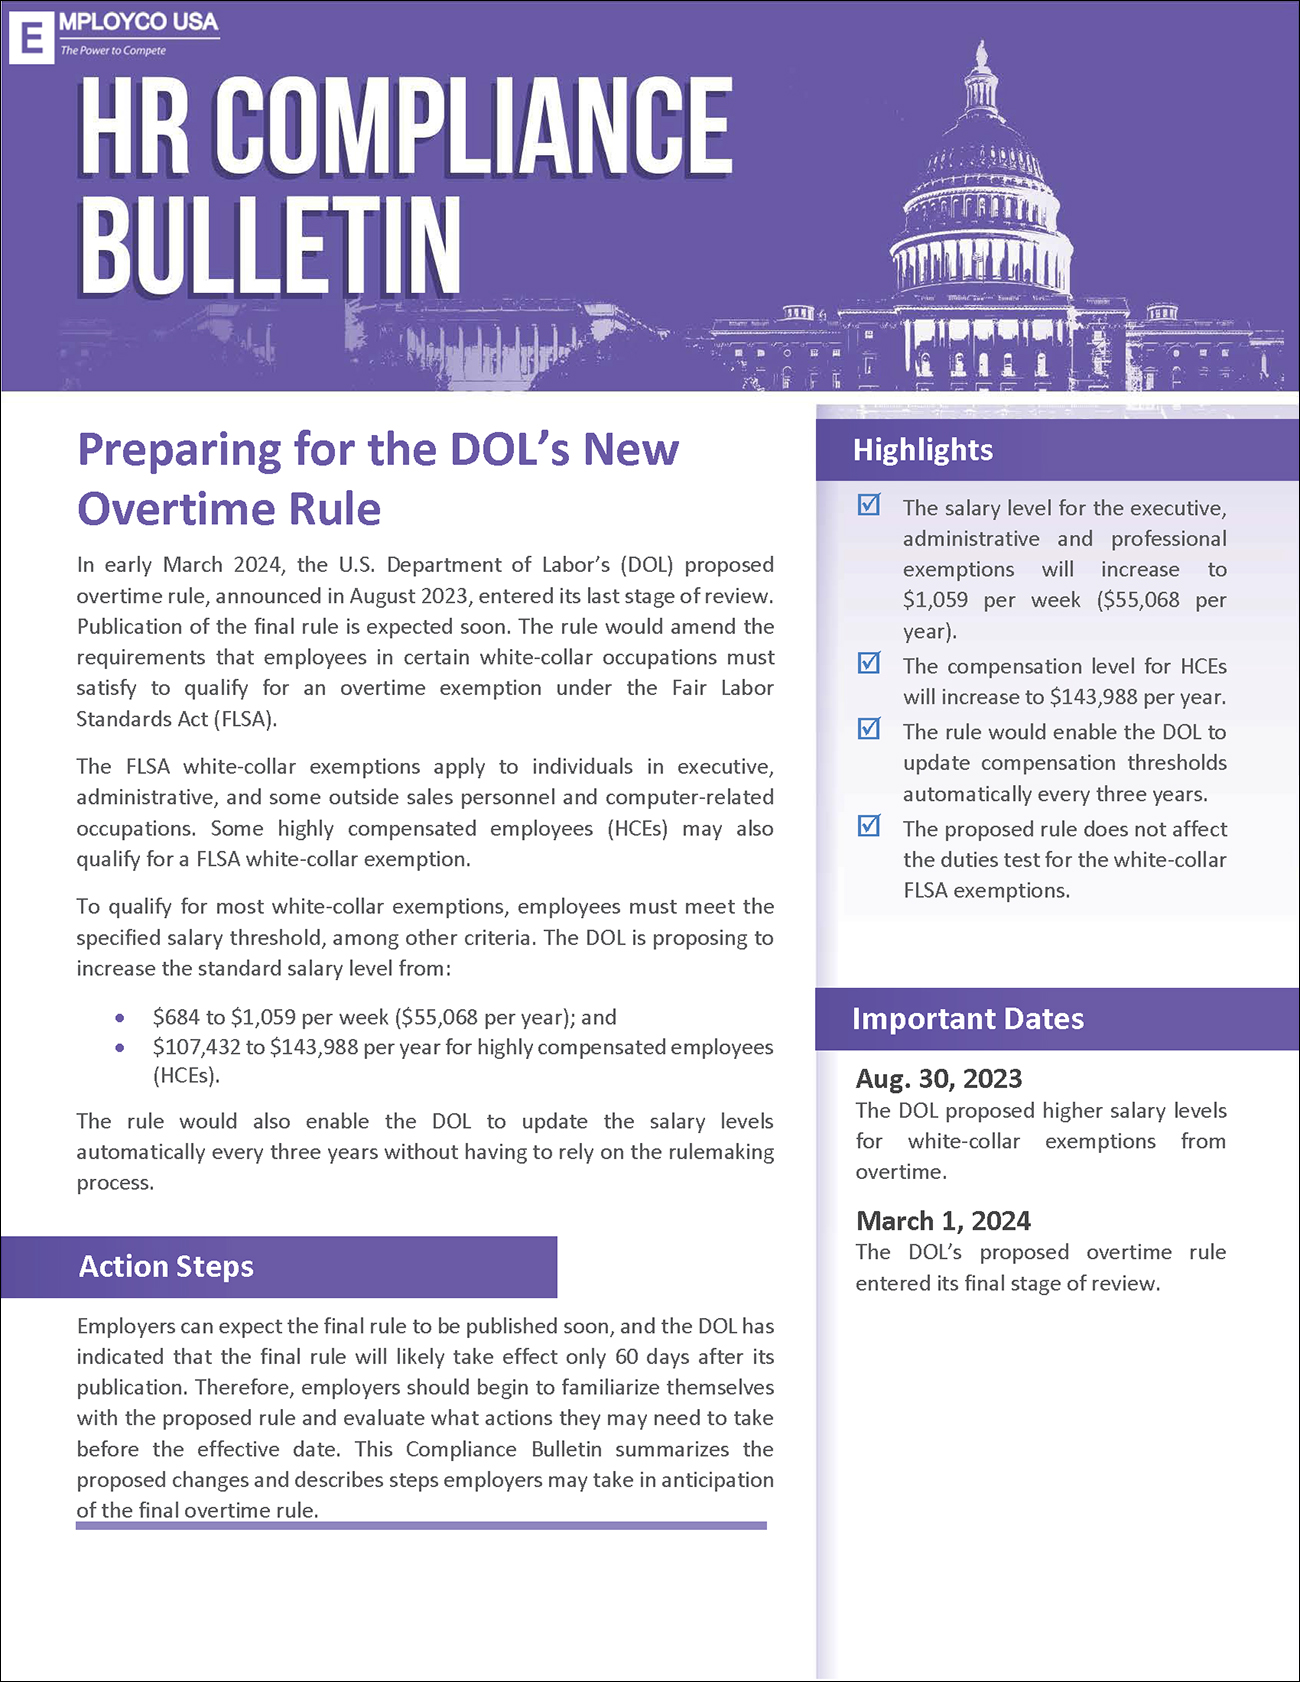 HR Compliance Bulletin: Preparing for the DOL’s New Overtime Rule